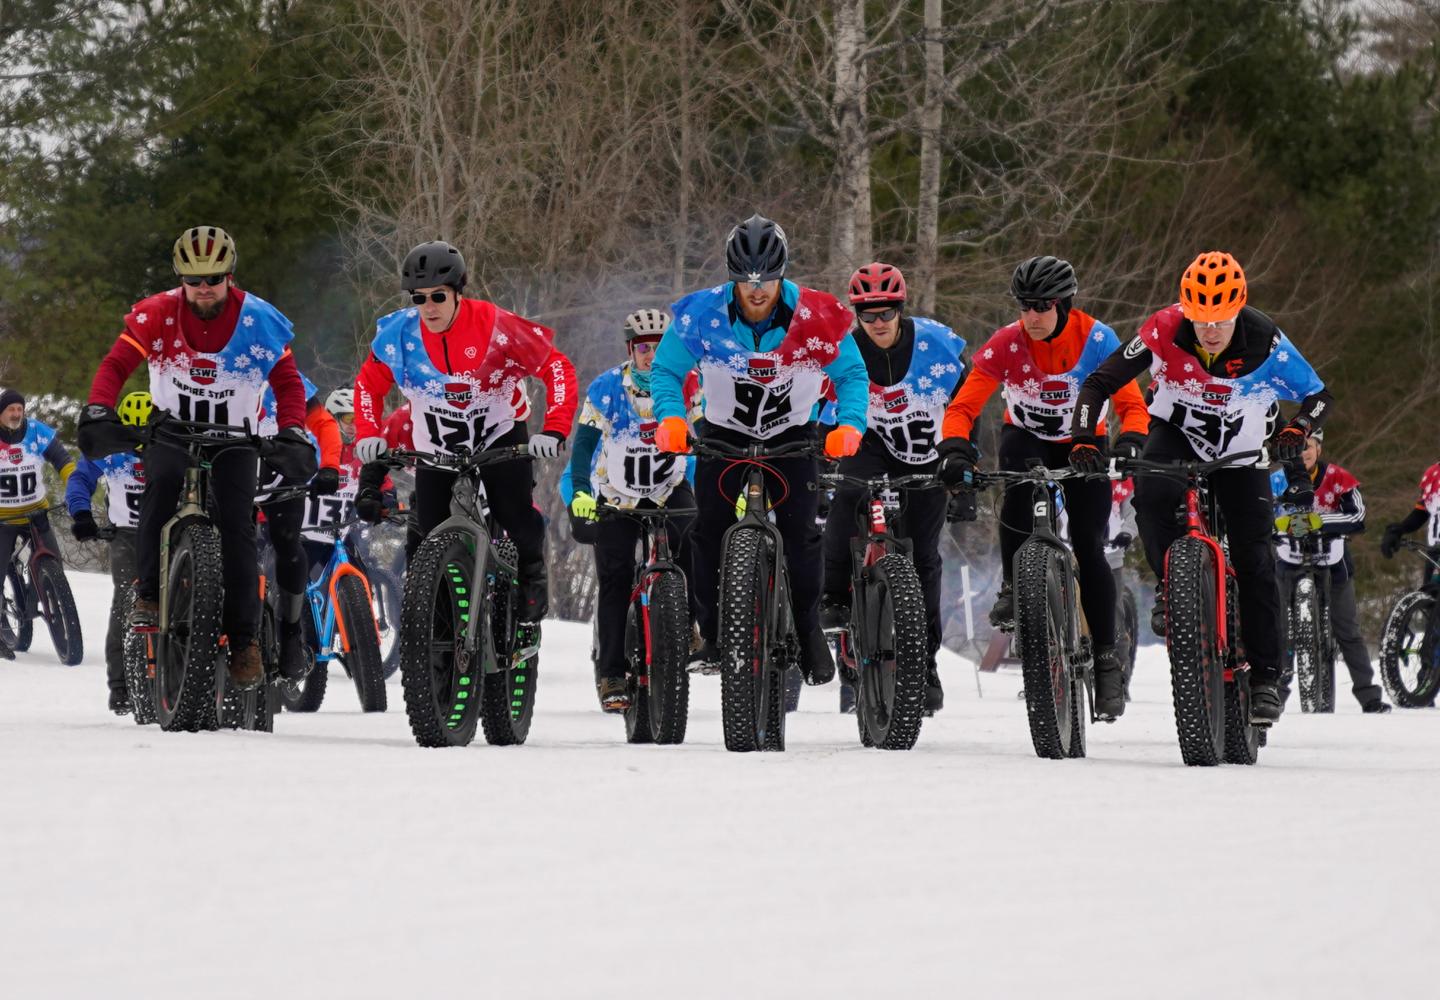 The Saturday, February 3 Empire State Winter Games Fat Bike Races will be hosted at Dewey Mountain in Saranac Lake and feature distances for all abilities and ages. 